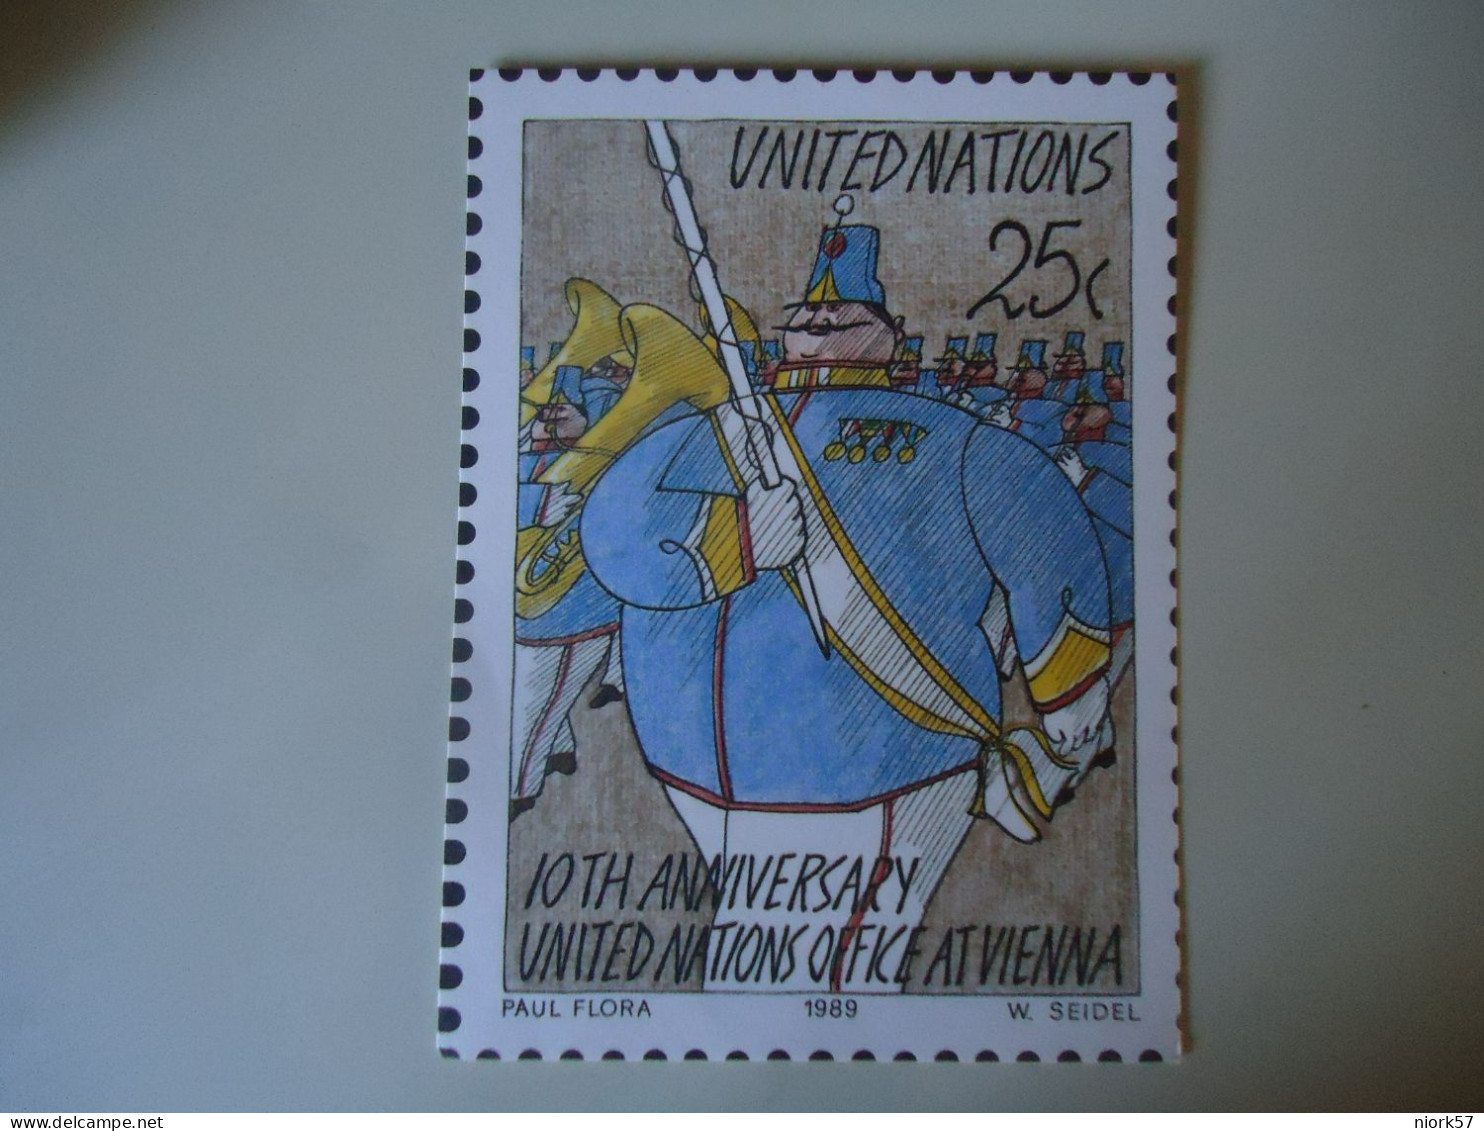 UNITED NATIONS POSTCARDS 1989  PAINTINGS UNPA WIEN - New York/Geneva/Vienna Joint Issues